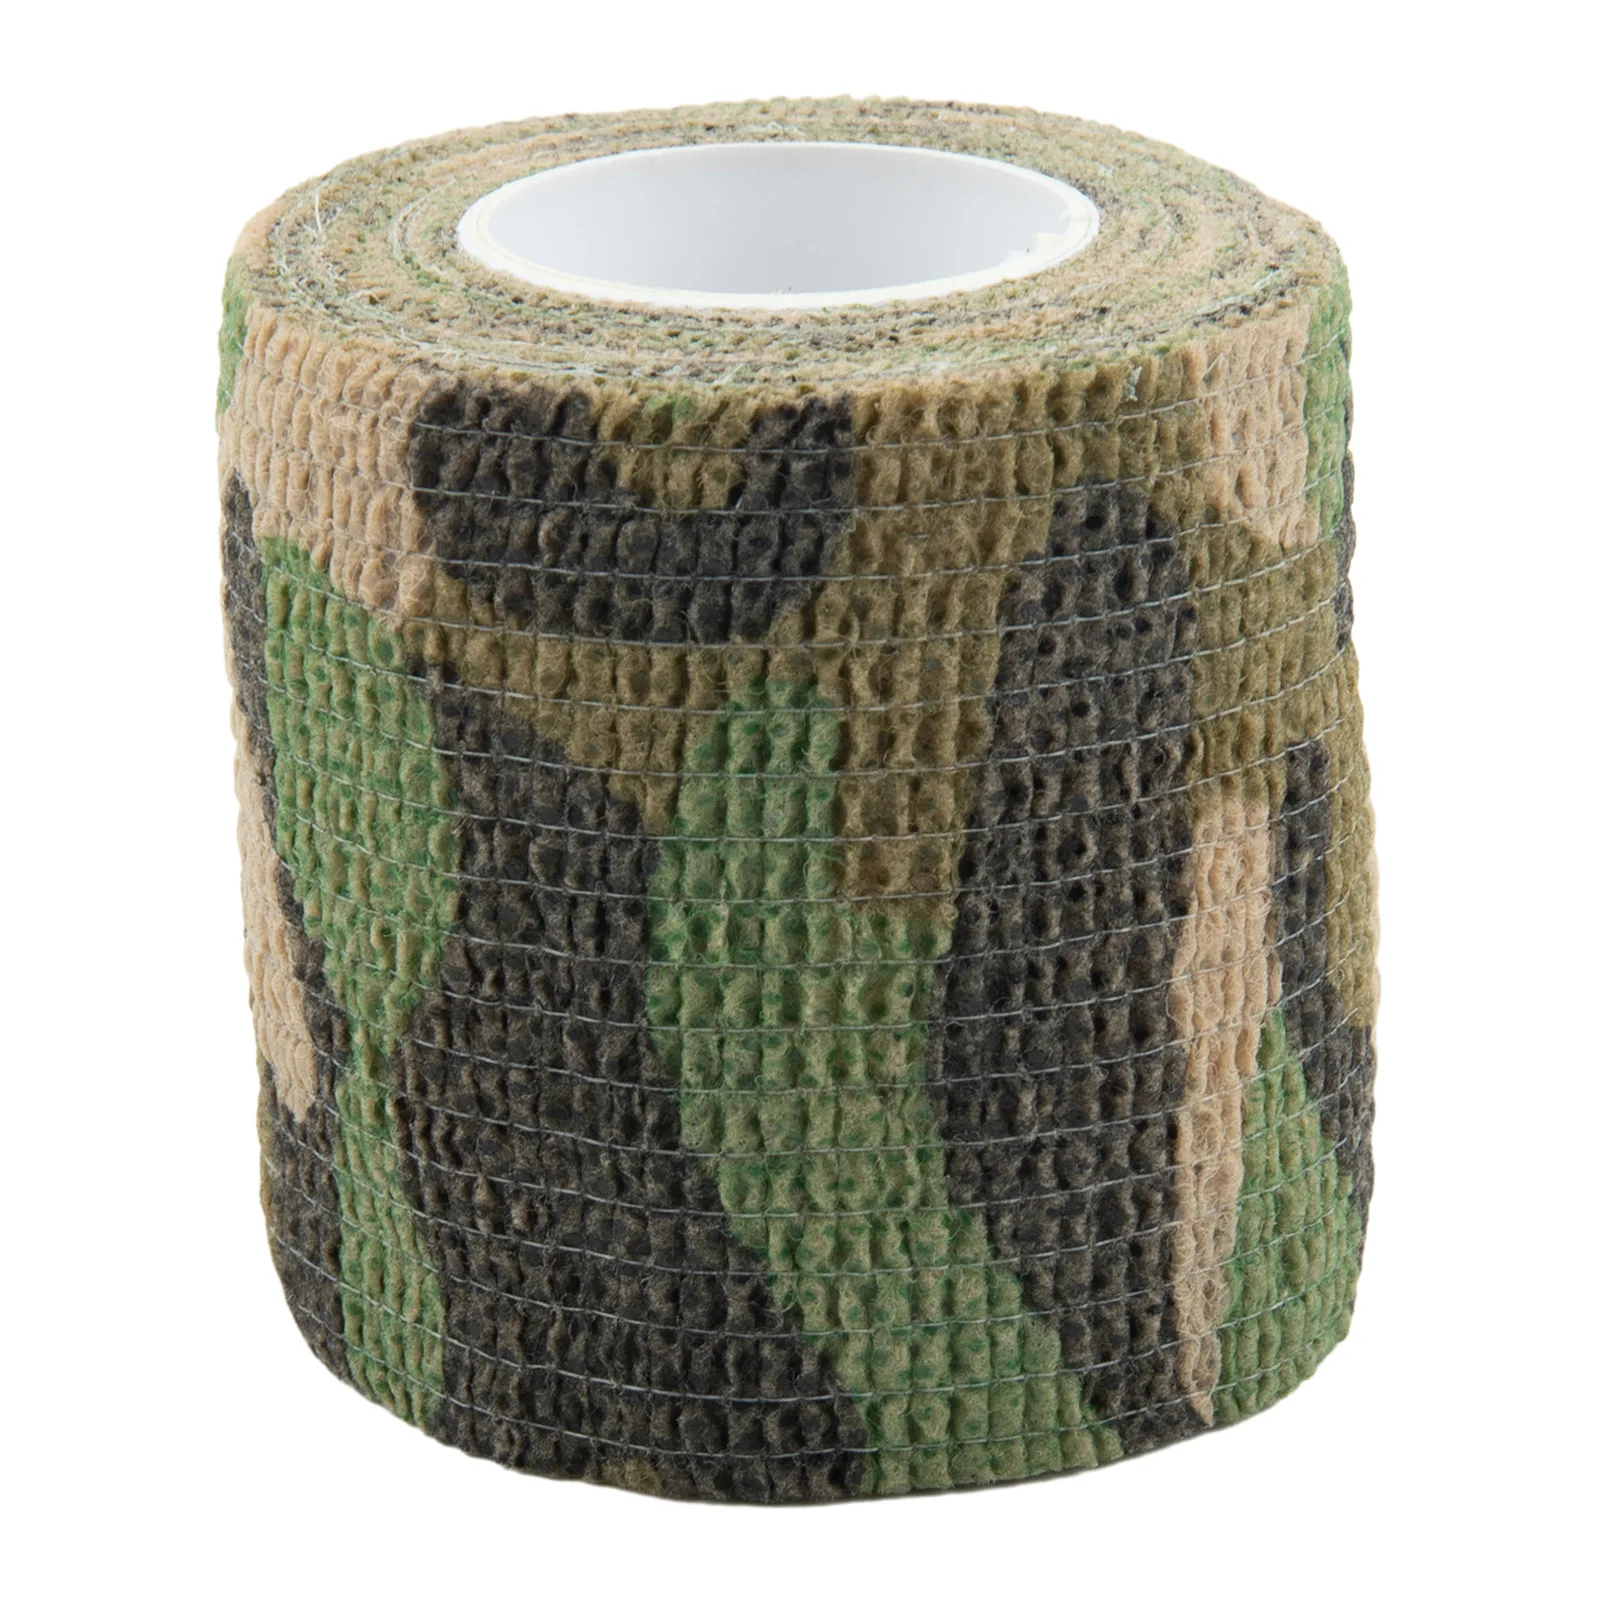 1pc Camouflage Invisible Tape Form Reusable Self Cling Camo Hunting Rifle Fabric Elastic Wrap Tape Army Outdoor Hunt Accessories